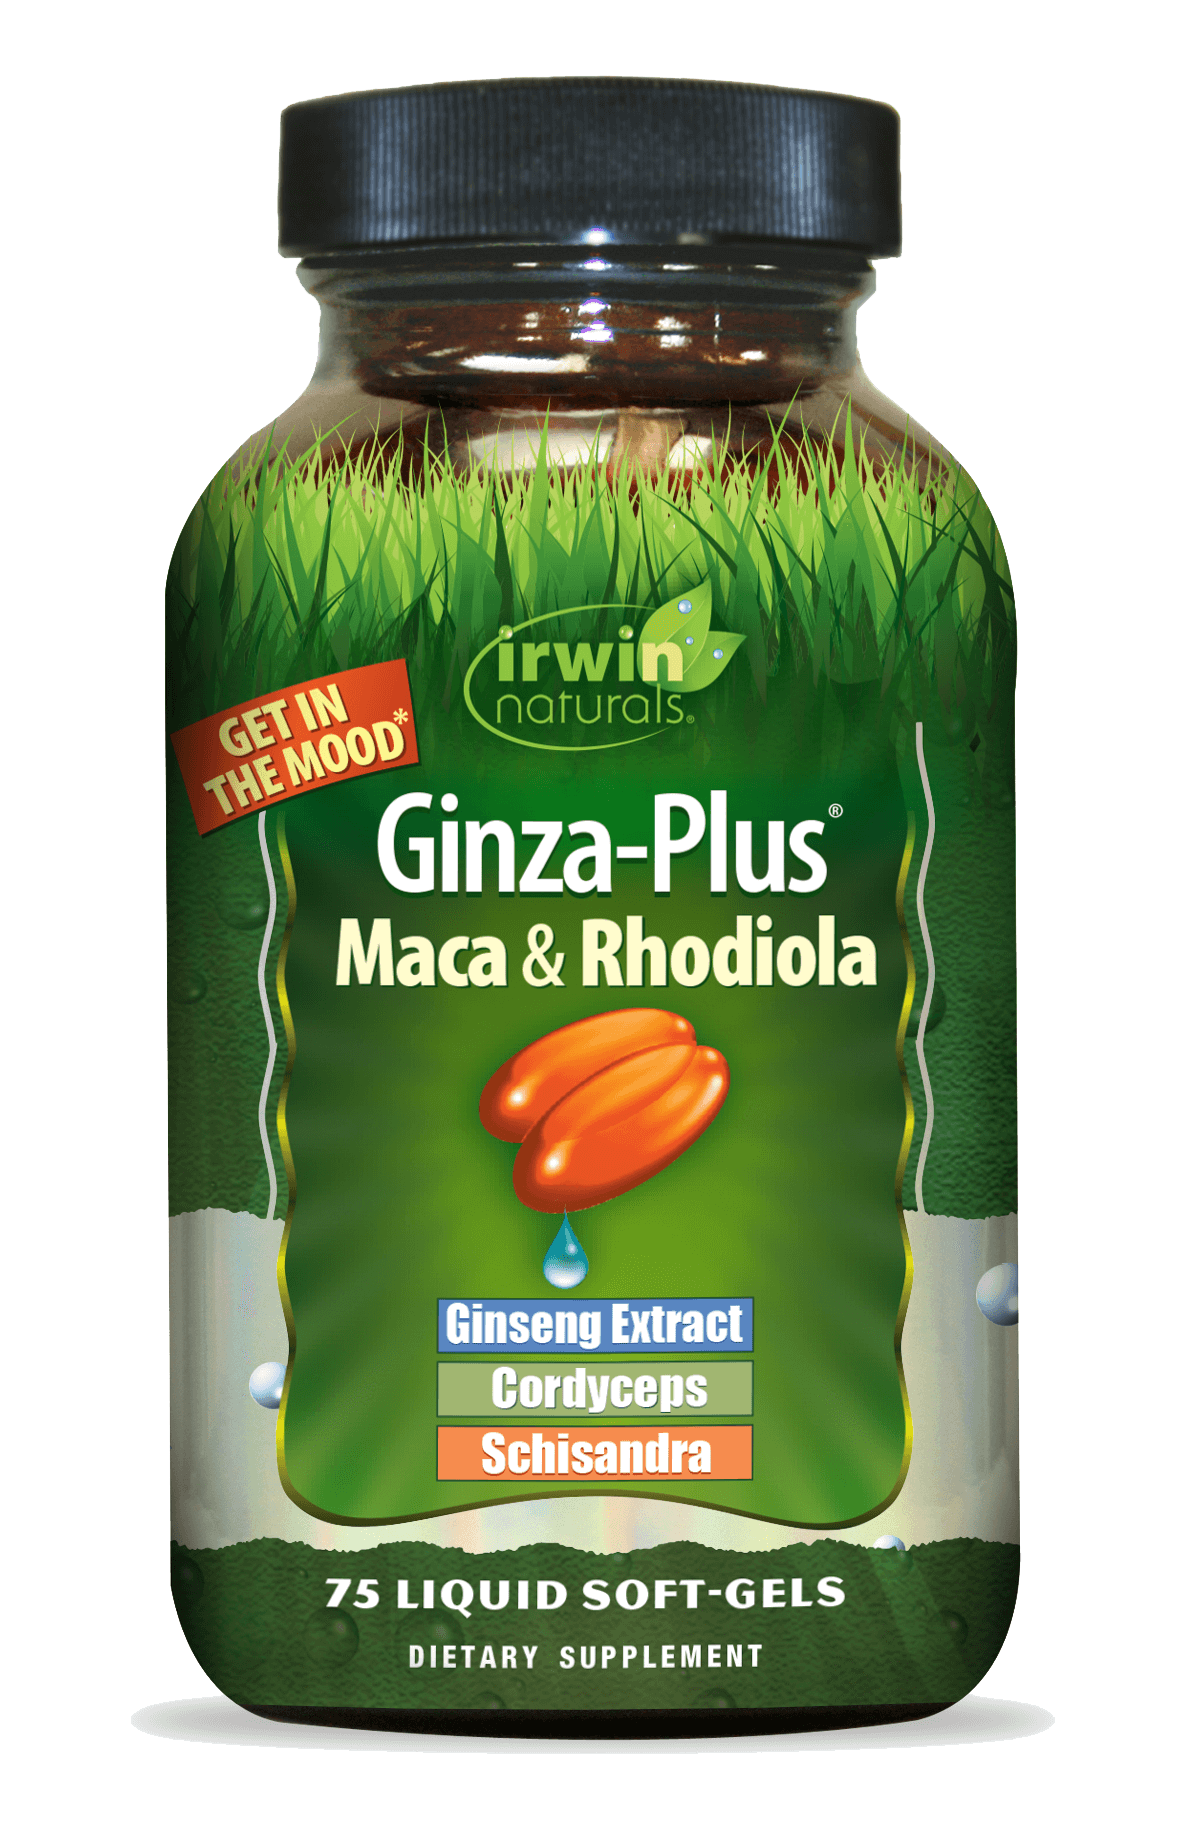 Ginza Plus Maca and Rhodiola by Irwin Naturals